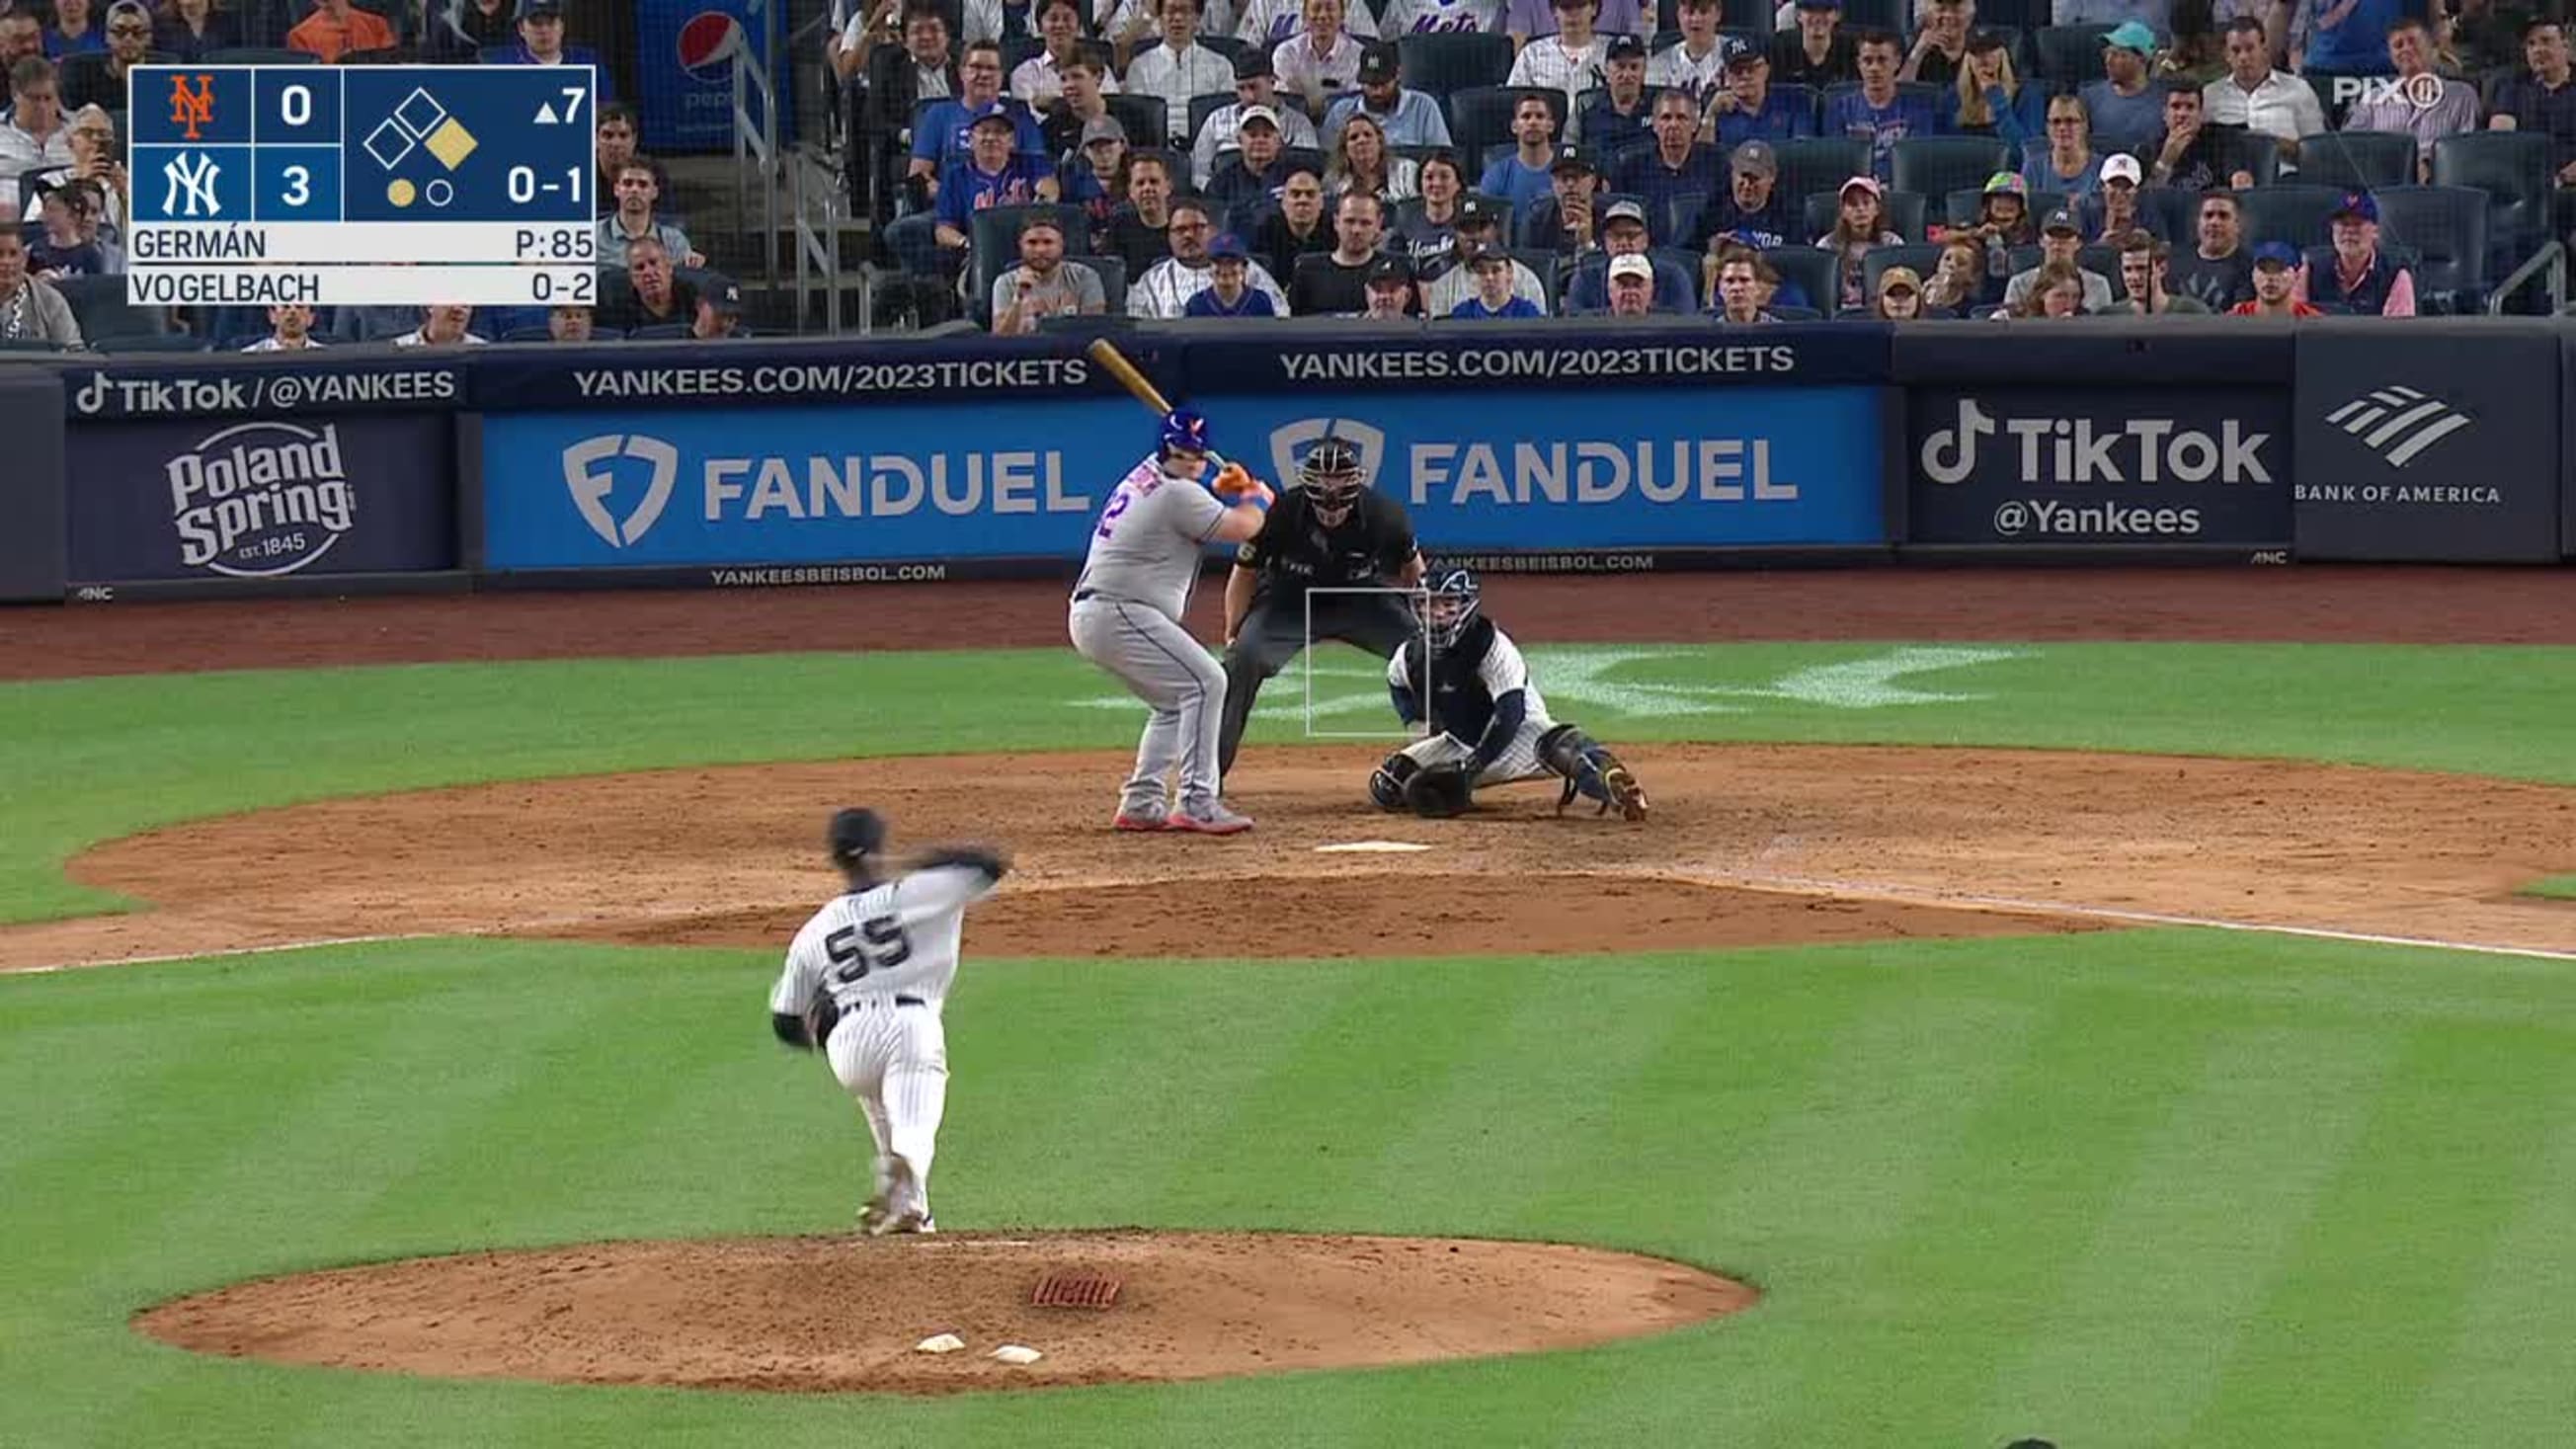 Daniel “Danny Burgers” Vogelbach intentionally puts the ball over the wall  for a grand slam to give the Mets a 7-1 lead! : r/baseball